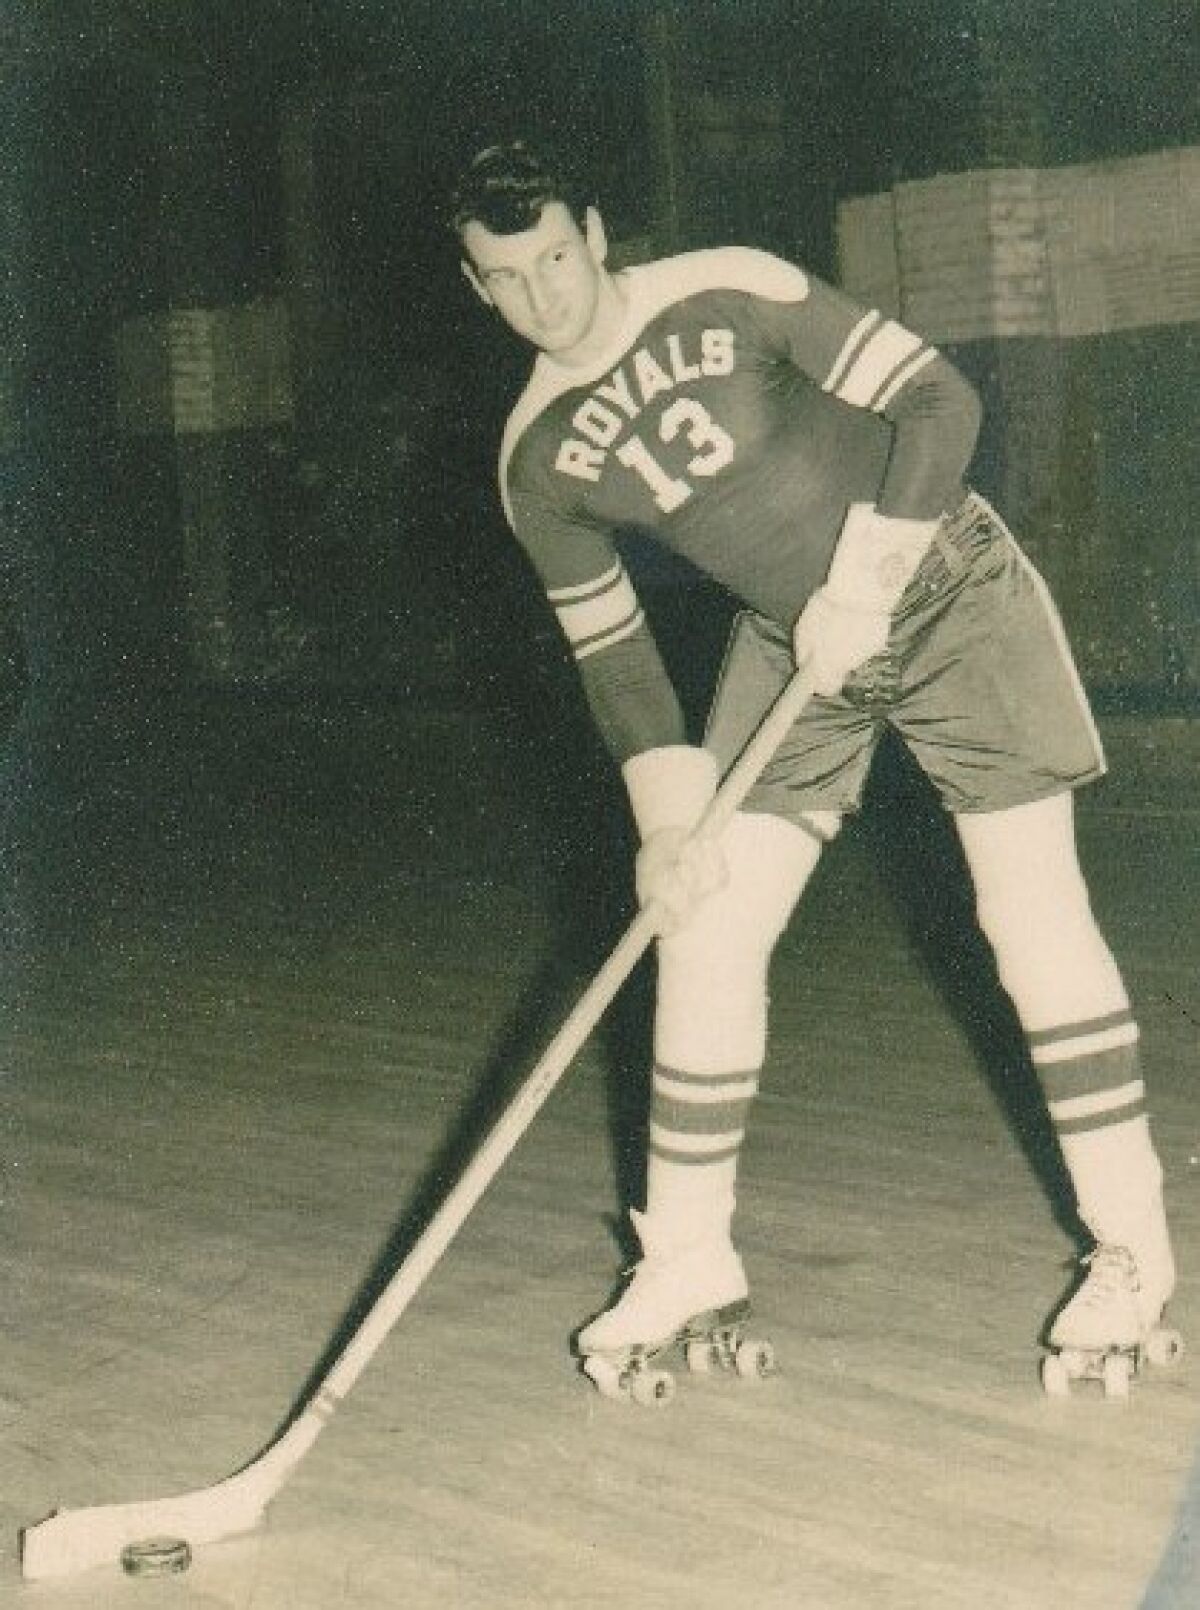 Jay Kucher played on the Royals roller hockey team at a Mission Beach skating rink